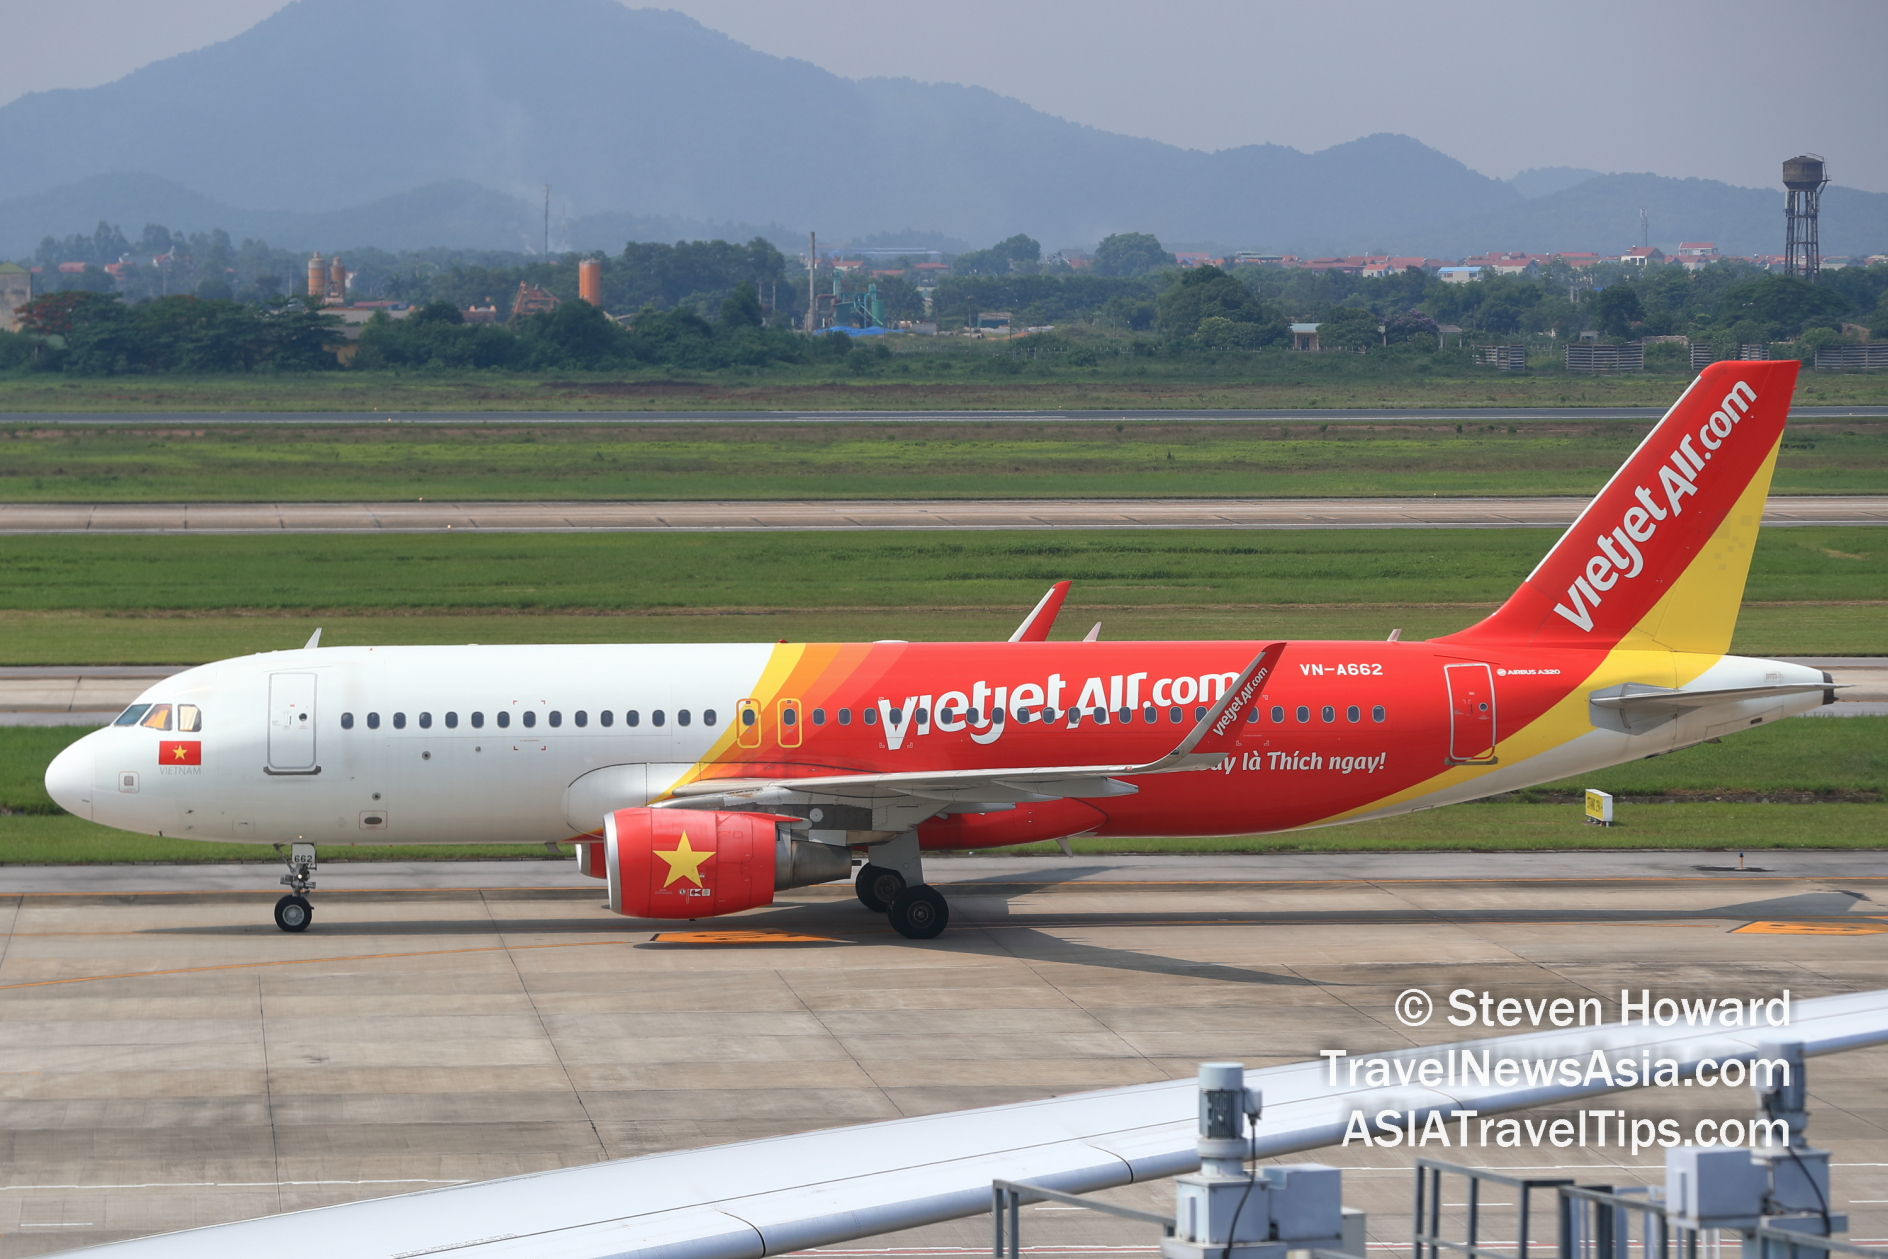 Vietjet A320 reg: VN-A662. Picture by Steven Howard of TravelNewsAsia.com Click to enlarge.